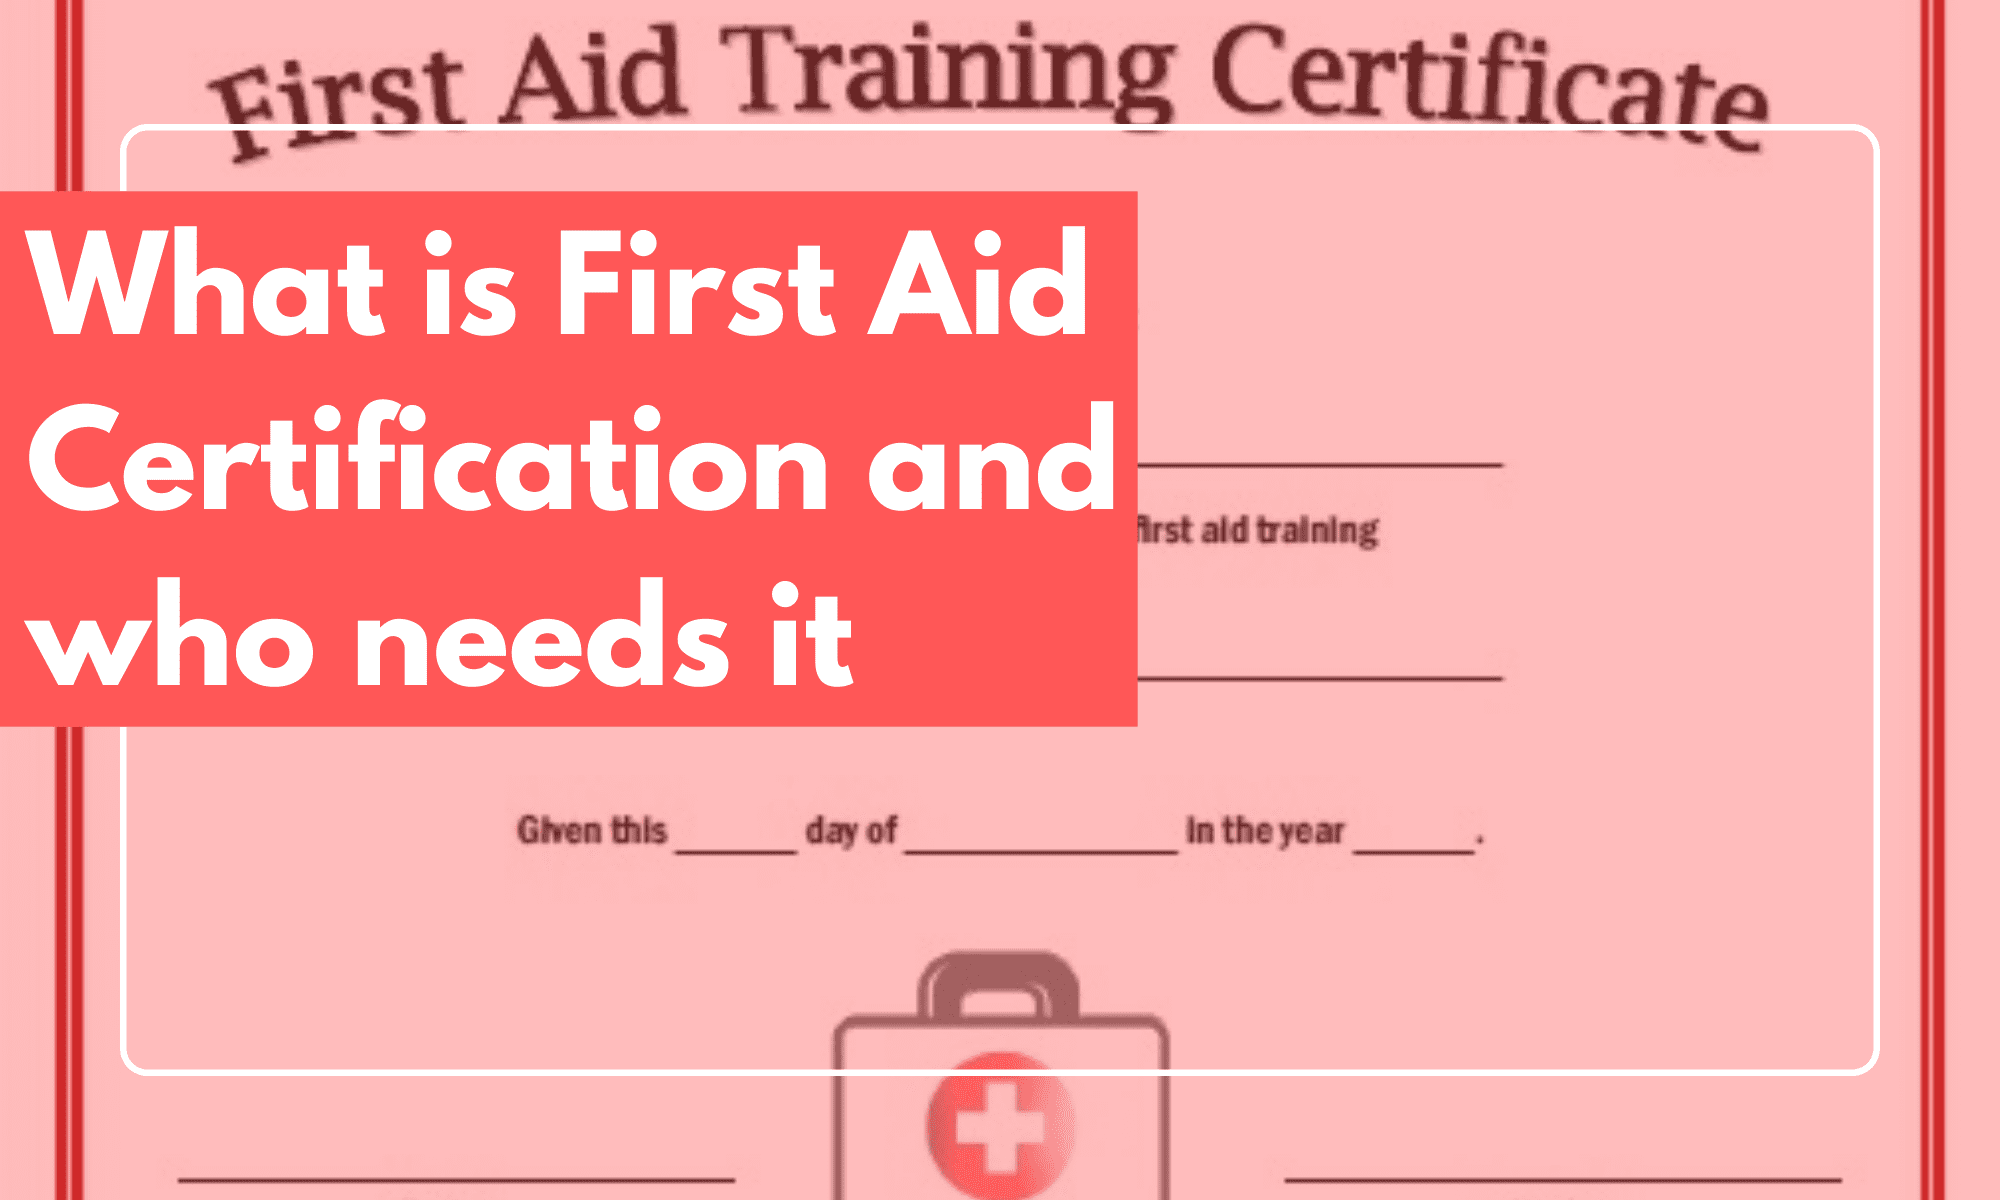 First aid certification